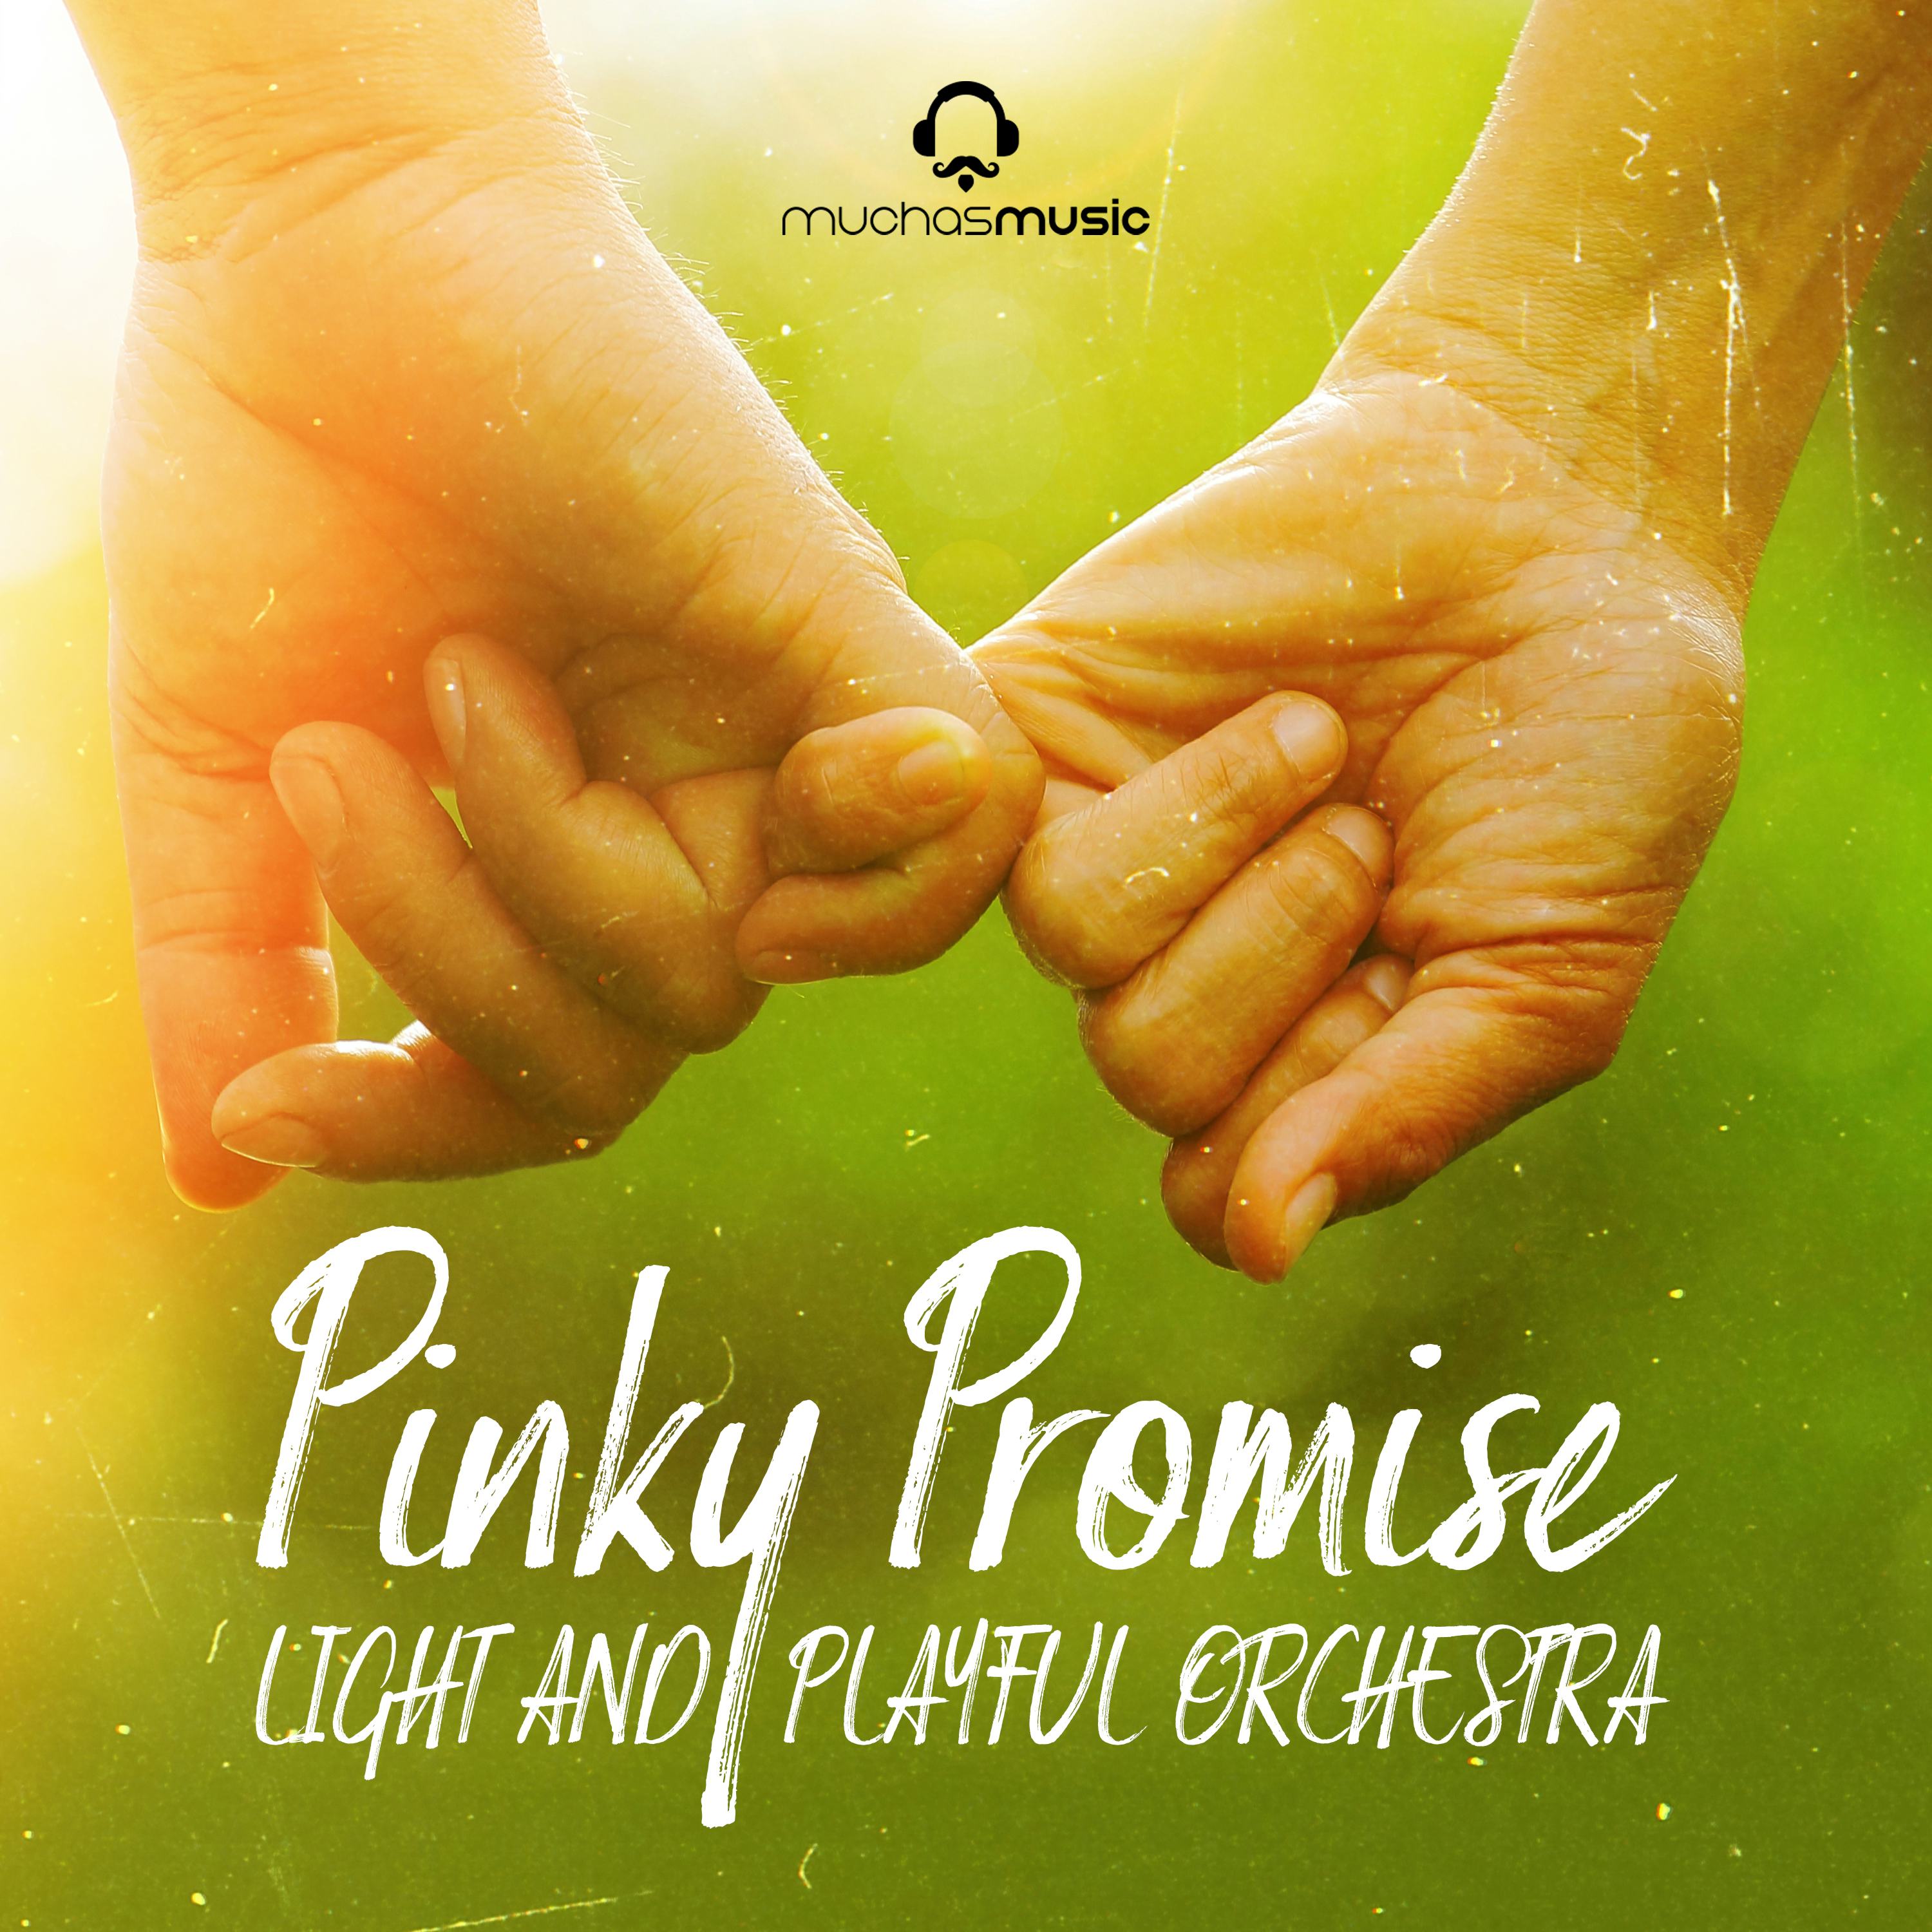 pinky promise quotes